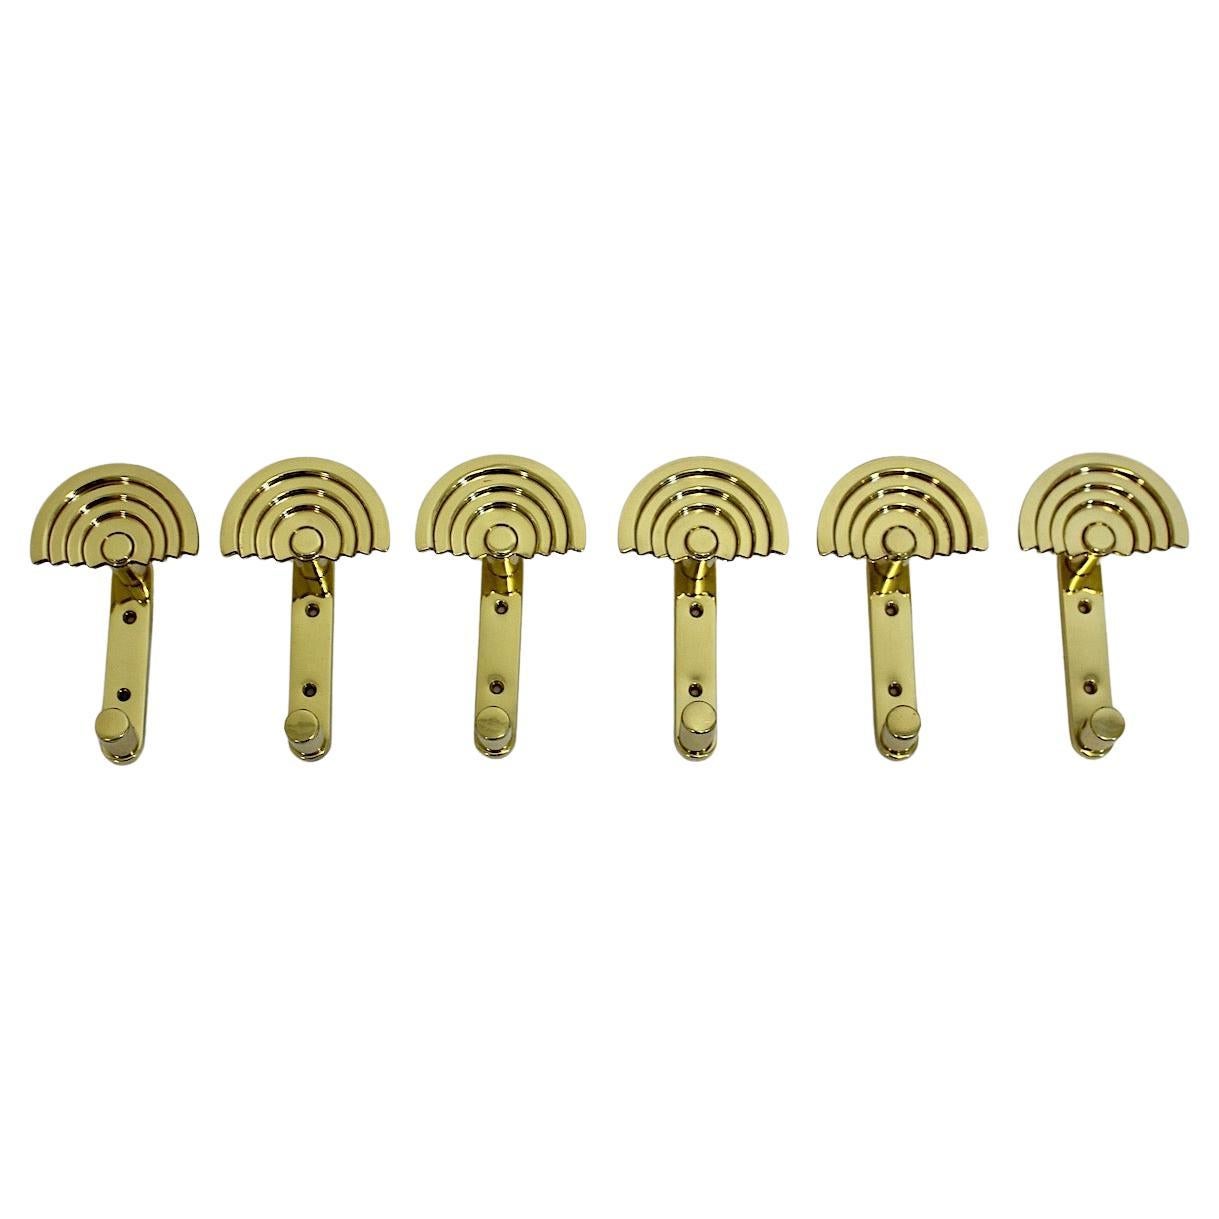 Postmodern Vintage Brass Six Wall Hooks SE 314 C Ettore Sottsass 1985 Italy For Sale